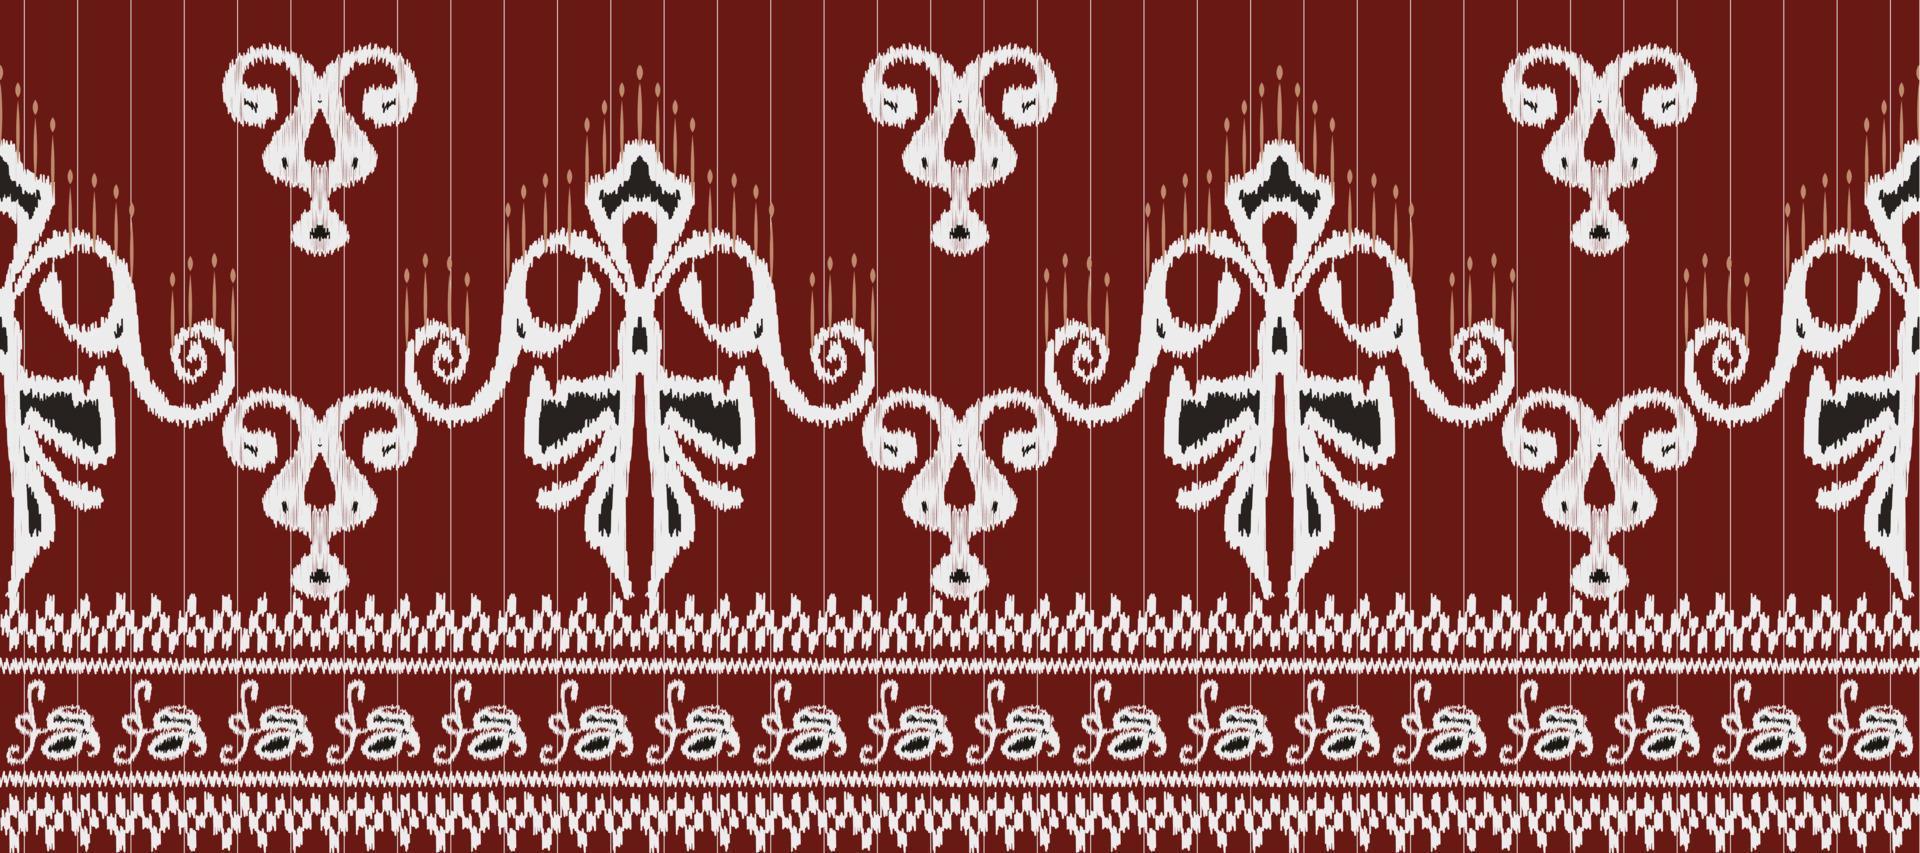 African Motif Ikat paisley embroidery background. geometric ethnic oriental pattern traditional. Ikat Aztec style abstract vector illustration. design for print texture,fabric,saree,sari,carpet.